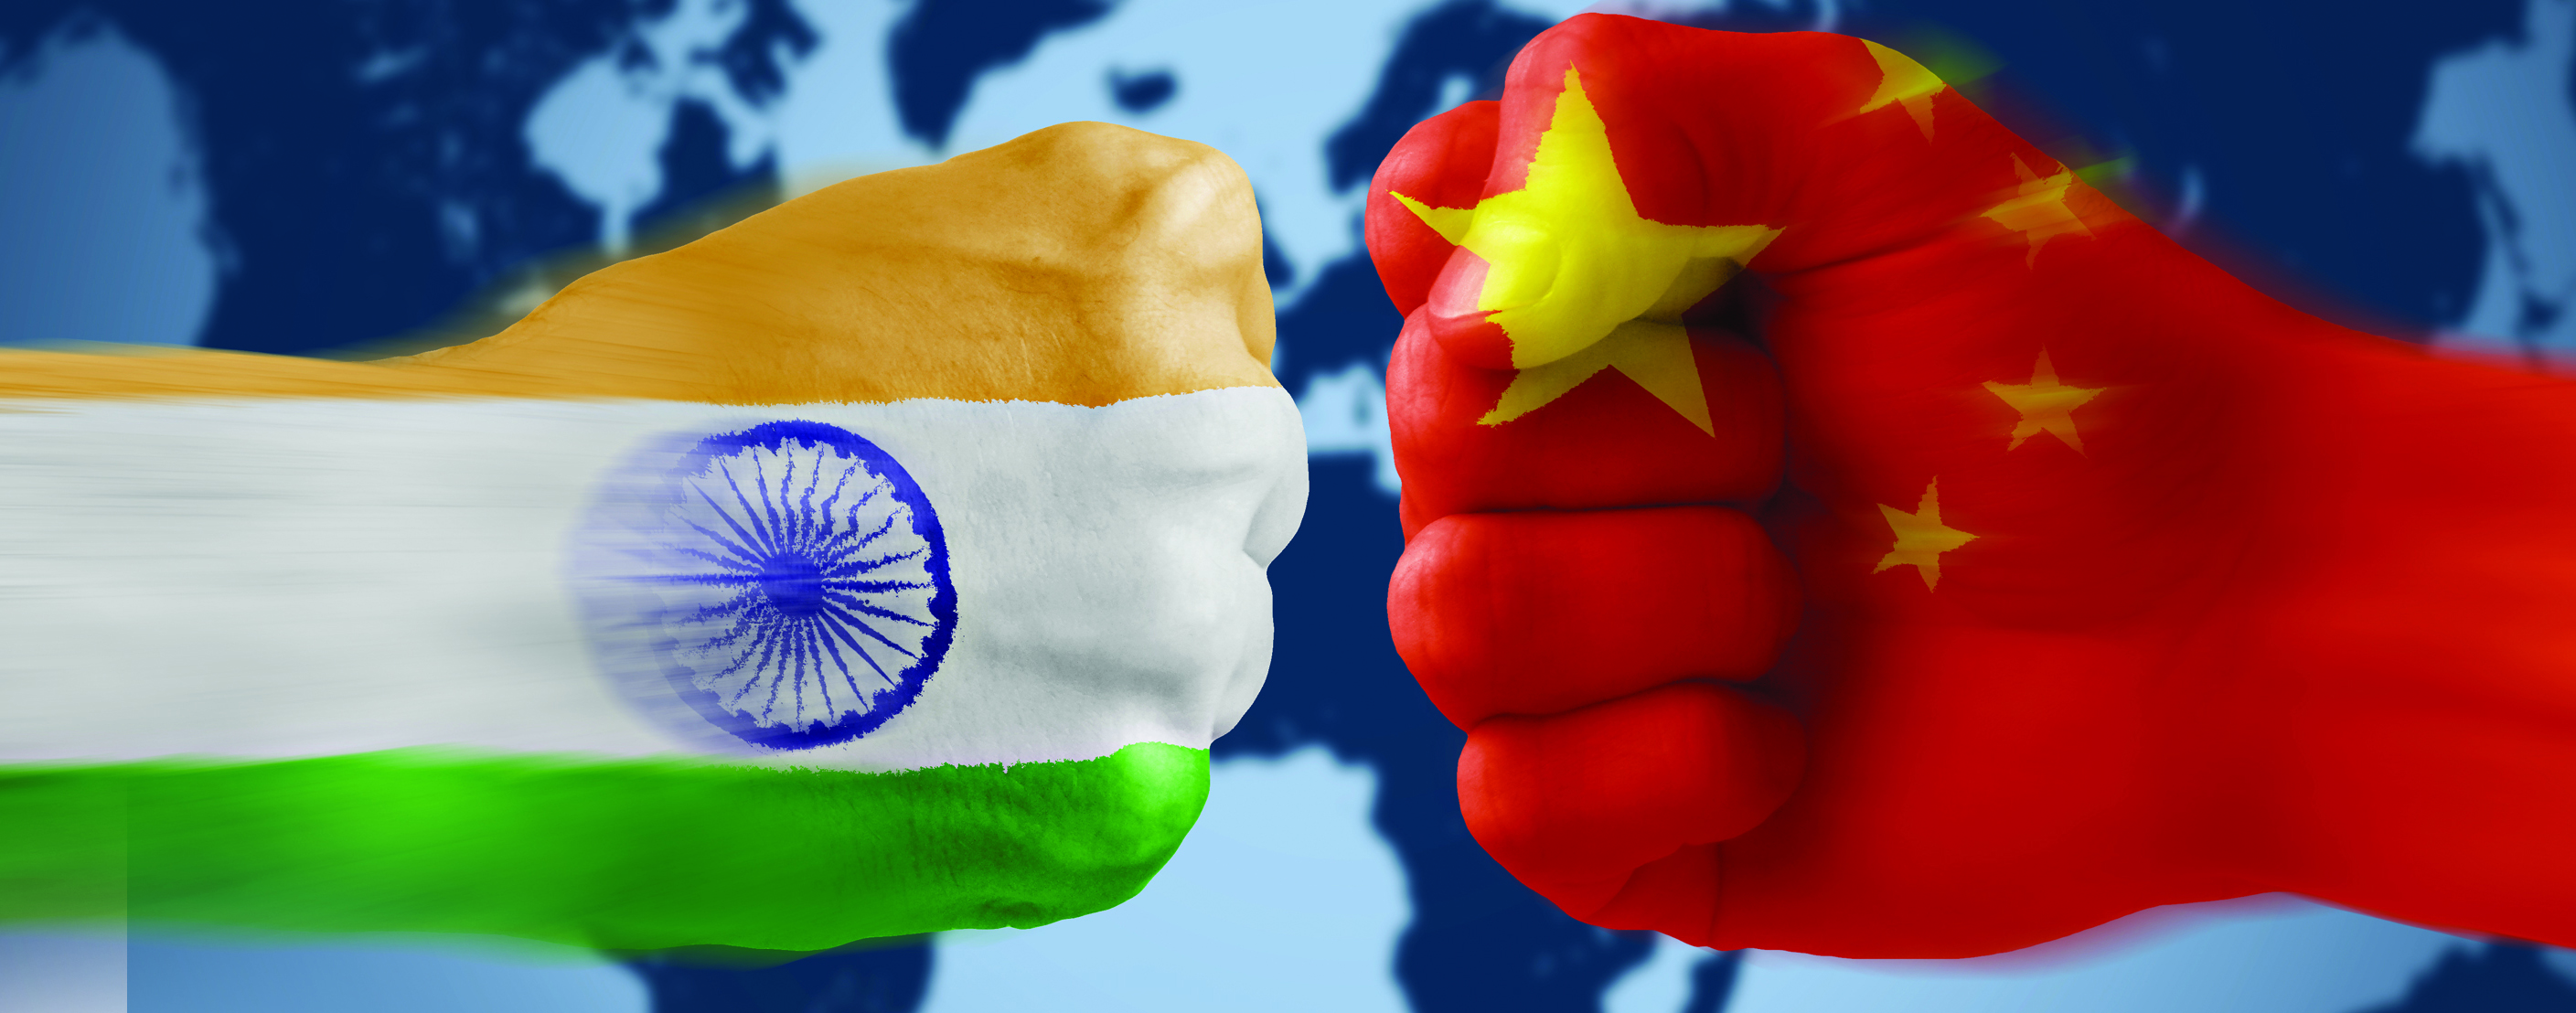 India-China Trade War: What's at Stake ? March 2018 issue